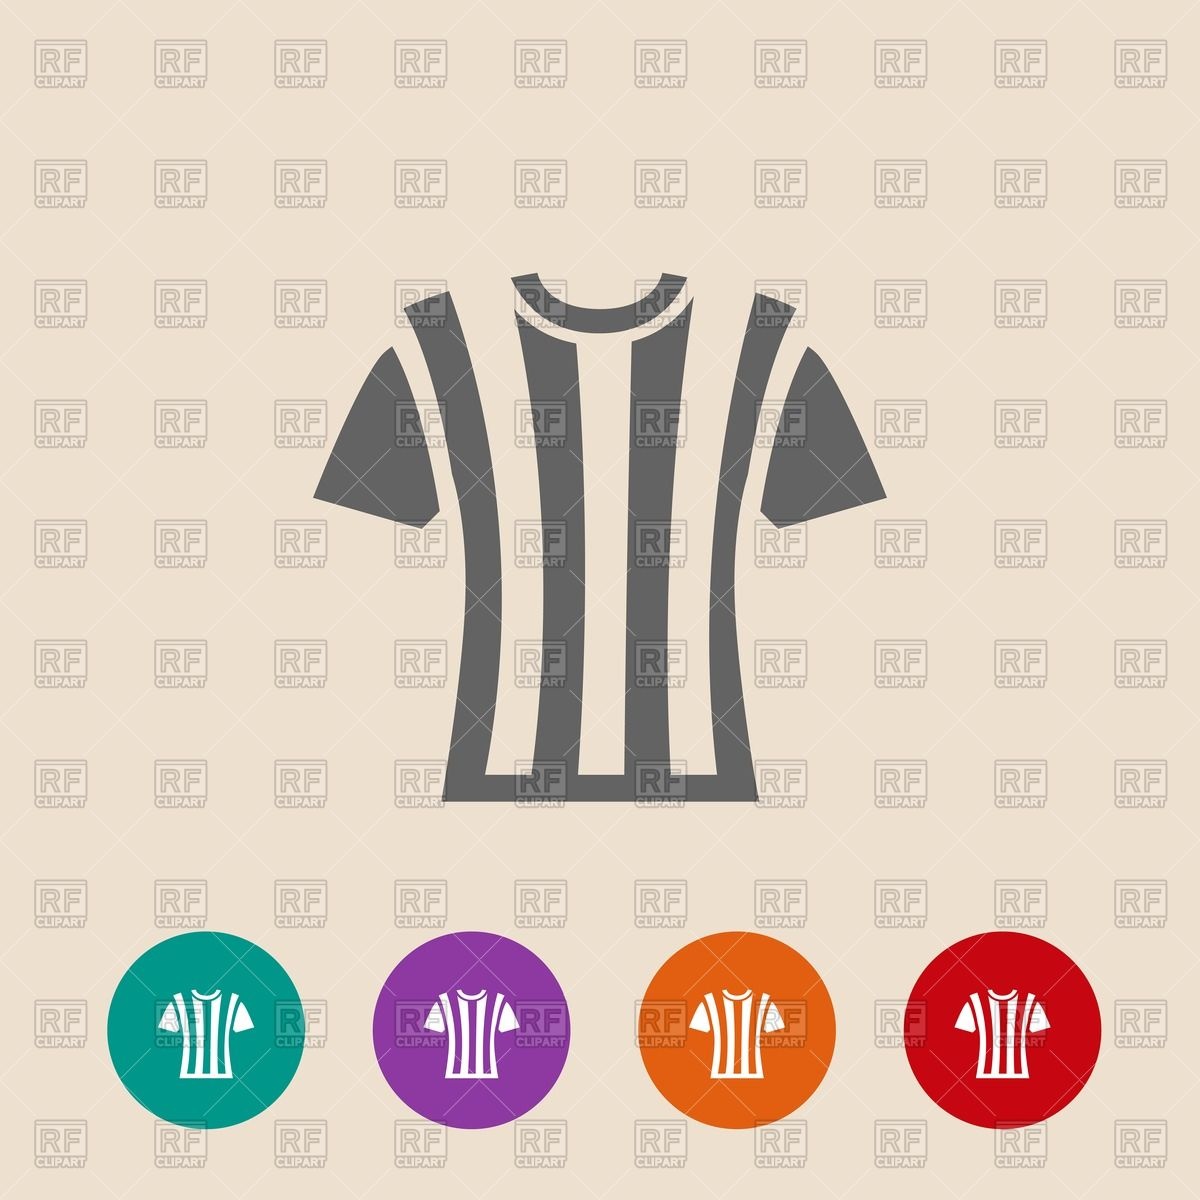 Soccer Referee T Shirt Flat Icons 73616 Download Royalty Free Vector